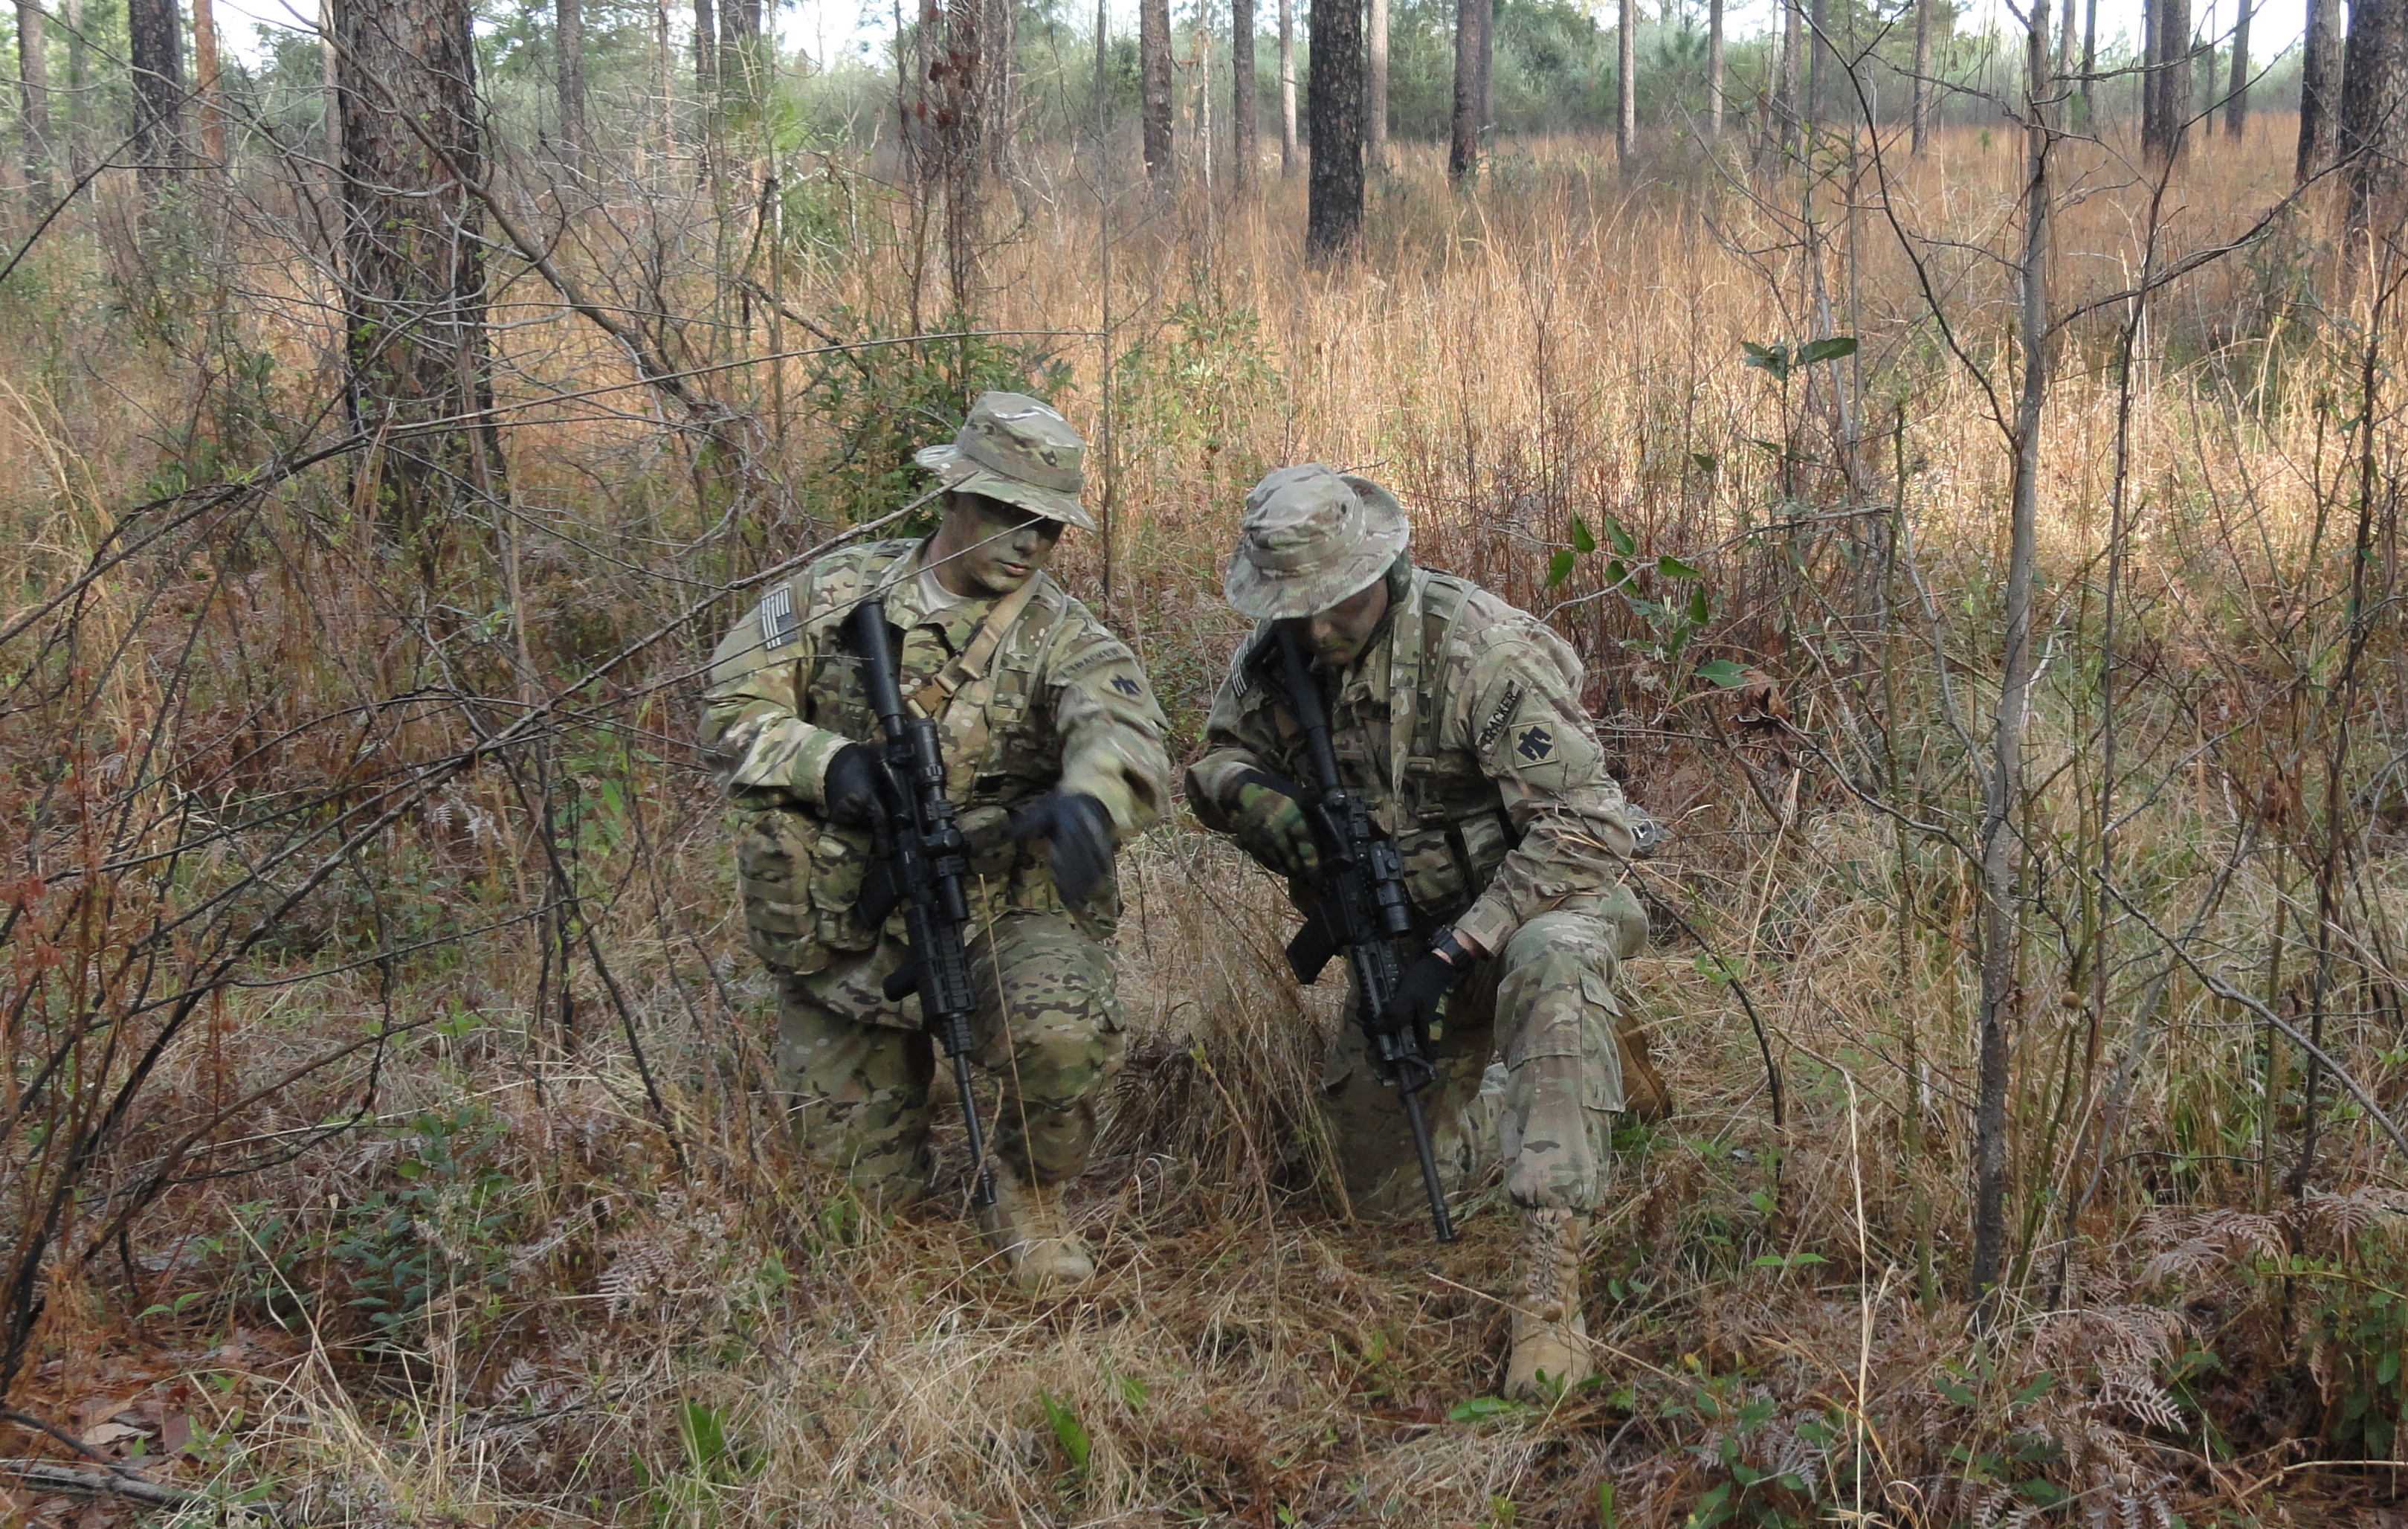 U.S. Army National Guard Soldiers conducting our Tracking Course.